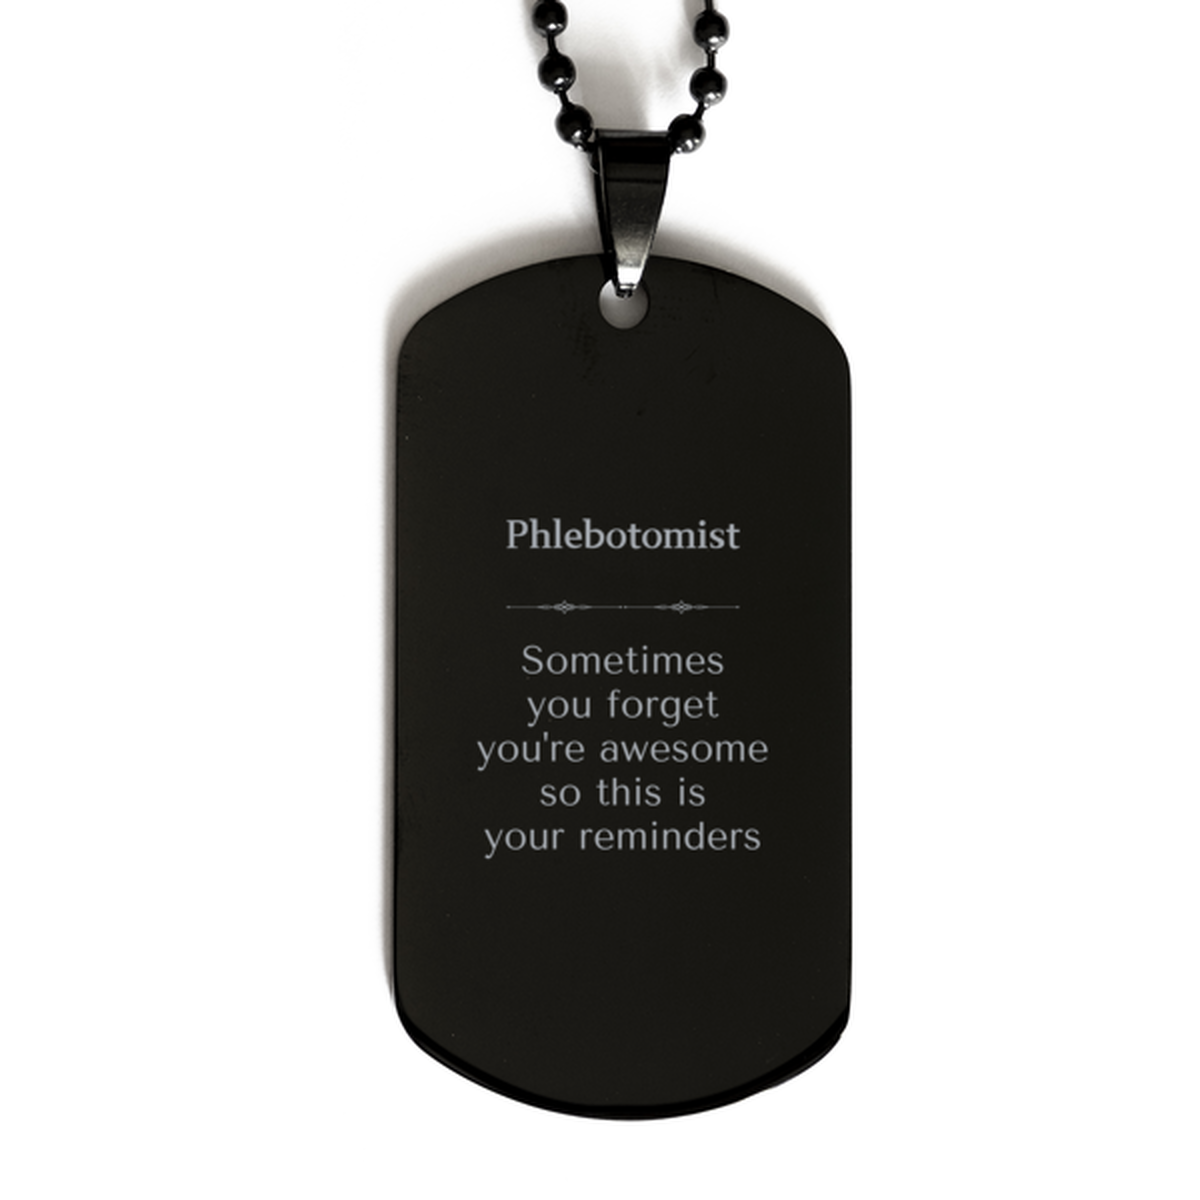 Sentimental Phlebotomist Black Dog Tag, Phlebotomist Sometimes you forget you're awesome so this is your reminders, Graduation Christmas Birthday Gifts for Phlebotomist, Men, Women, Coworkers